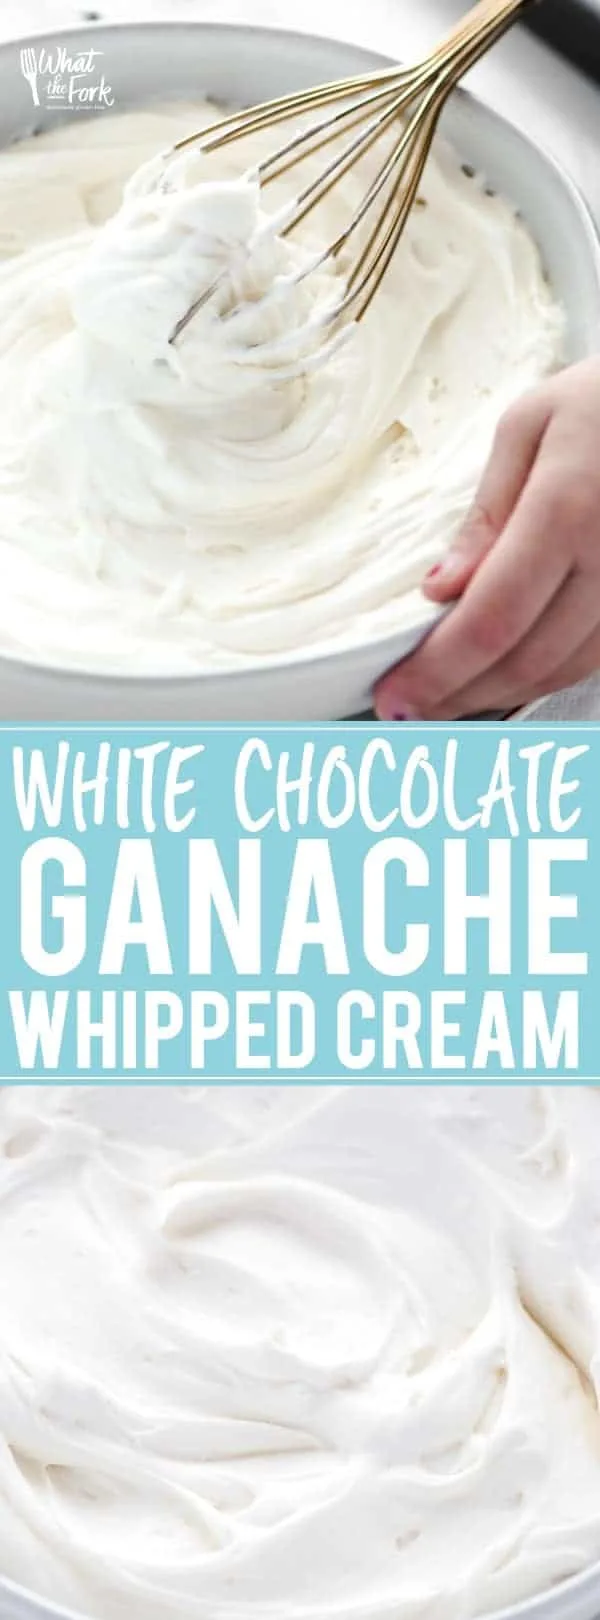 Sweet and creamy two ingredient white chocolate ganache whipped cream is light and airy but holds its shape well. Can be refrigerated for up to a week. Perfect for frosting cakes and cupcakes! Only TWO INGREDIENTS needed! Be sure to read the post for important tips. Recipe from @whattheforkblog | whattheforkfoodblog.com | stabilized whipped cream | dessert recipes | gluten free desserts | no-bake desserts #glutenfree #easyrecipes #recipes #whitechocolate #whippedcream #nobake